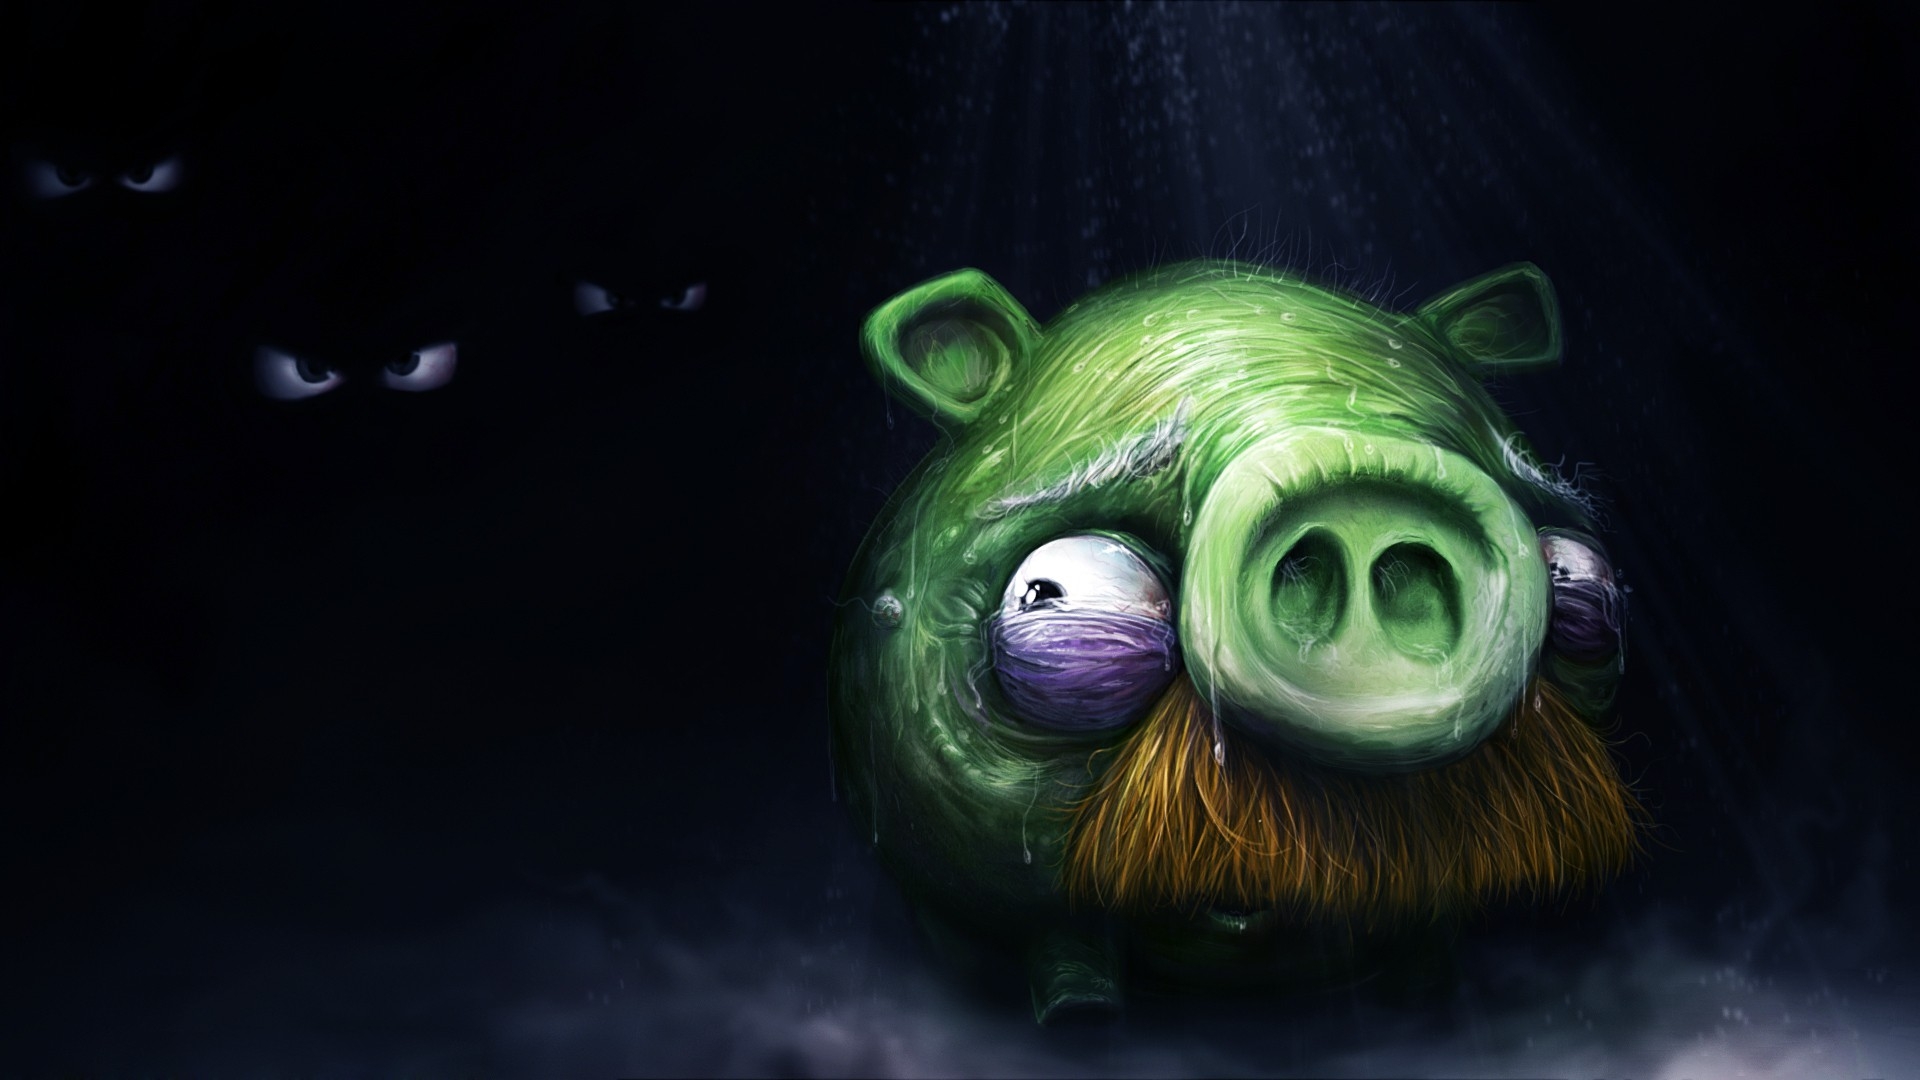 Download Wallpaper, Download 1920x1080 green video games old cartoonish darkness moustache artwork angry birds games pig scared 1920x108 Wallpaper –Free Wallpaper Download